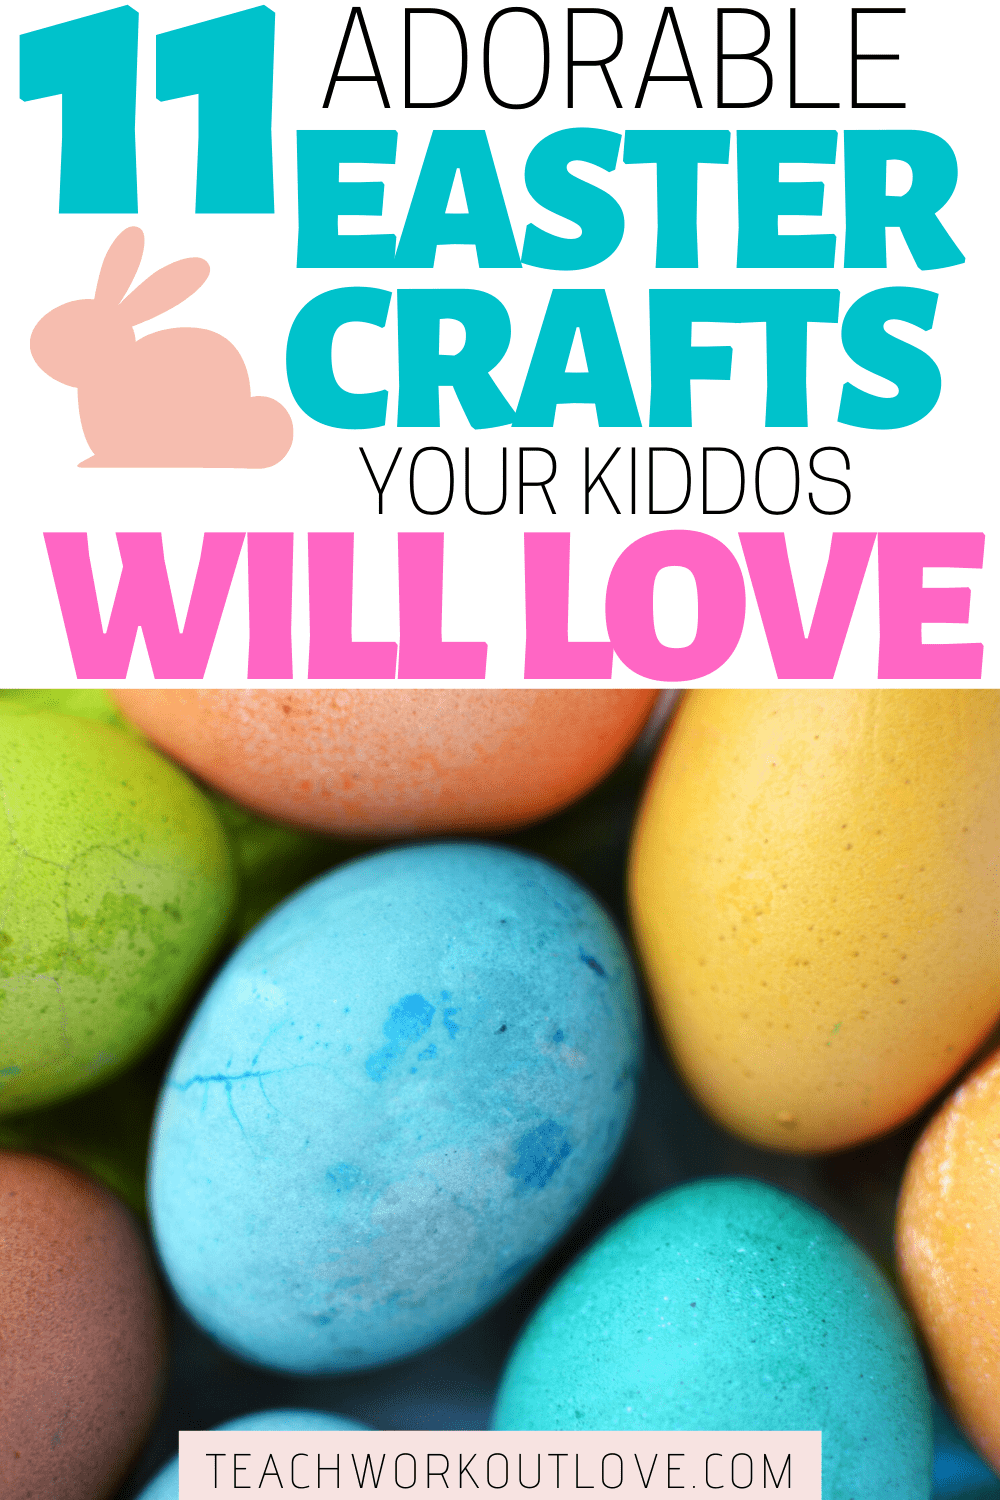 Getting ready for Easter but need some crafts to do with your kids at home? Here are Easter crafts your kids are guaranteed to fall in love with.